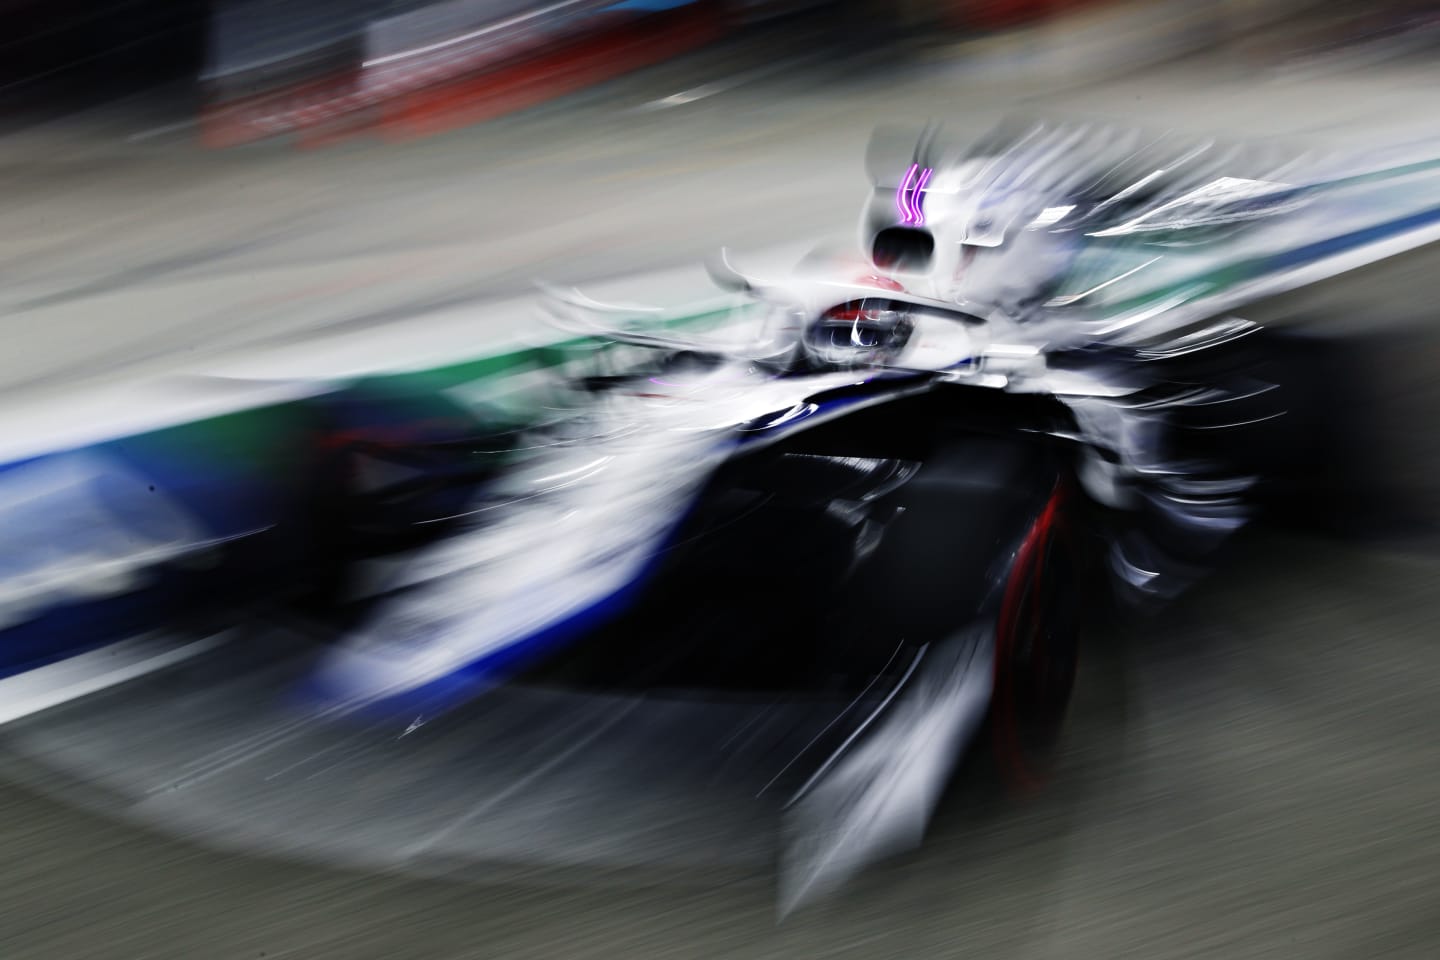 BAHRAIN, BAHRAIN - NOVEMBER 28: George Russell of Great Britain driving the (63) Williams Racing FW43 Mercedes in the Pitlane during qualifying ahead of the F1 Grand Prix of Bahrain at Bahrain International Circuit on November 28, 2020 in Bahrain, Bahrain. (Photo by Mark Thompson/Getty Images)